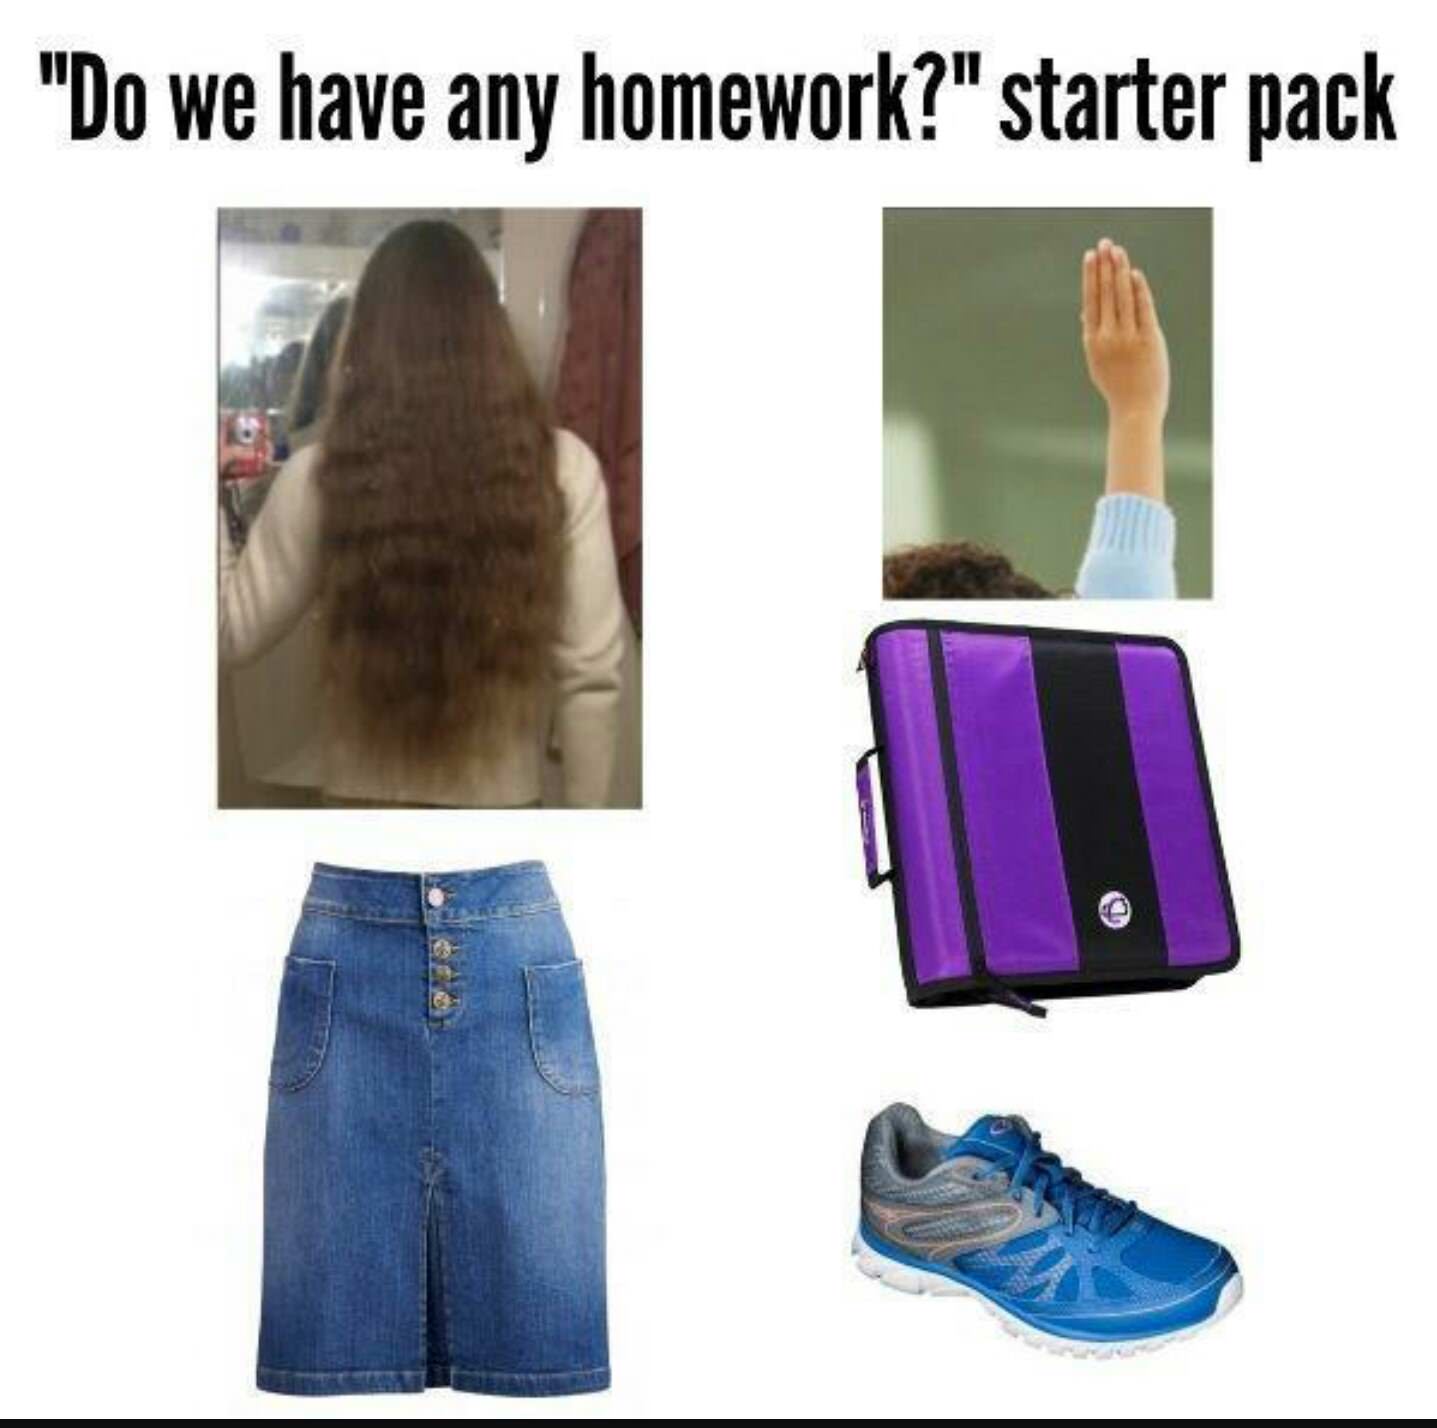 starter pack -  starter pack meme about when you forgot to collect the homework starter pack - "Do we have any homework?" starter pack